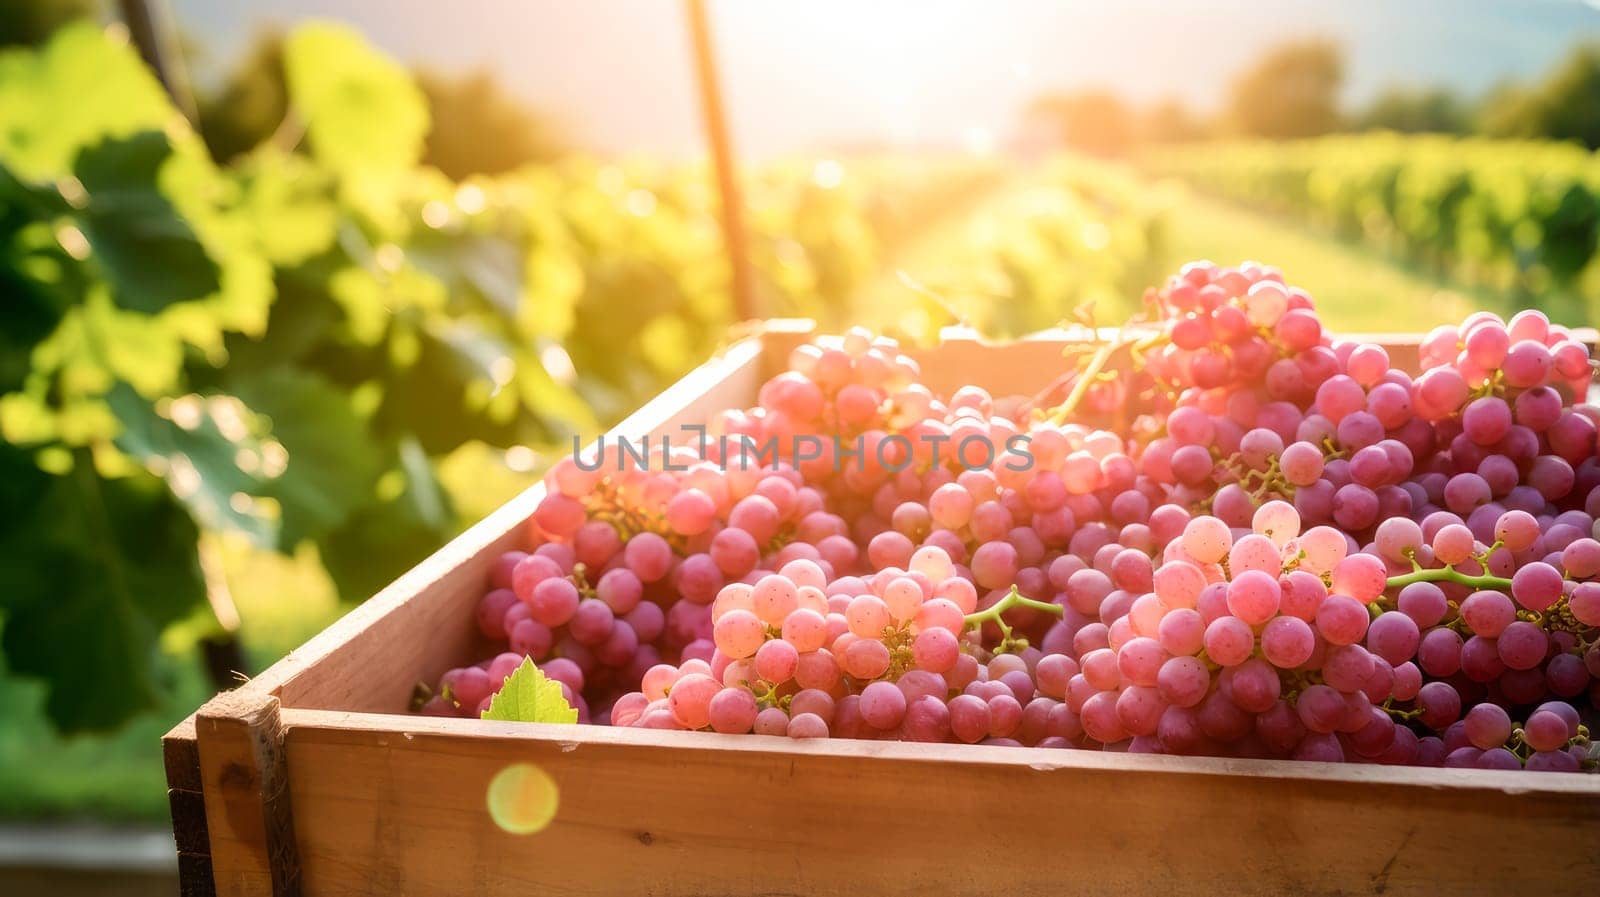 Collection of red rose grapes. Grapes in a basket and in the vineyard. Autumn mood in the wine industry countryside against backdrop sun. Wine making, vineyards, tourism business small and private business, chain restaurant, flavorful food and drinks